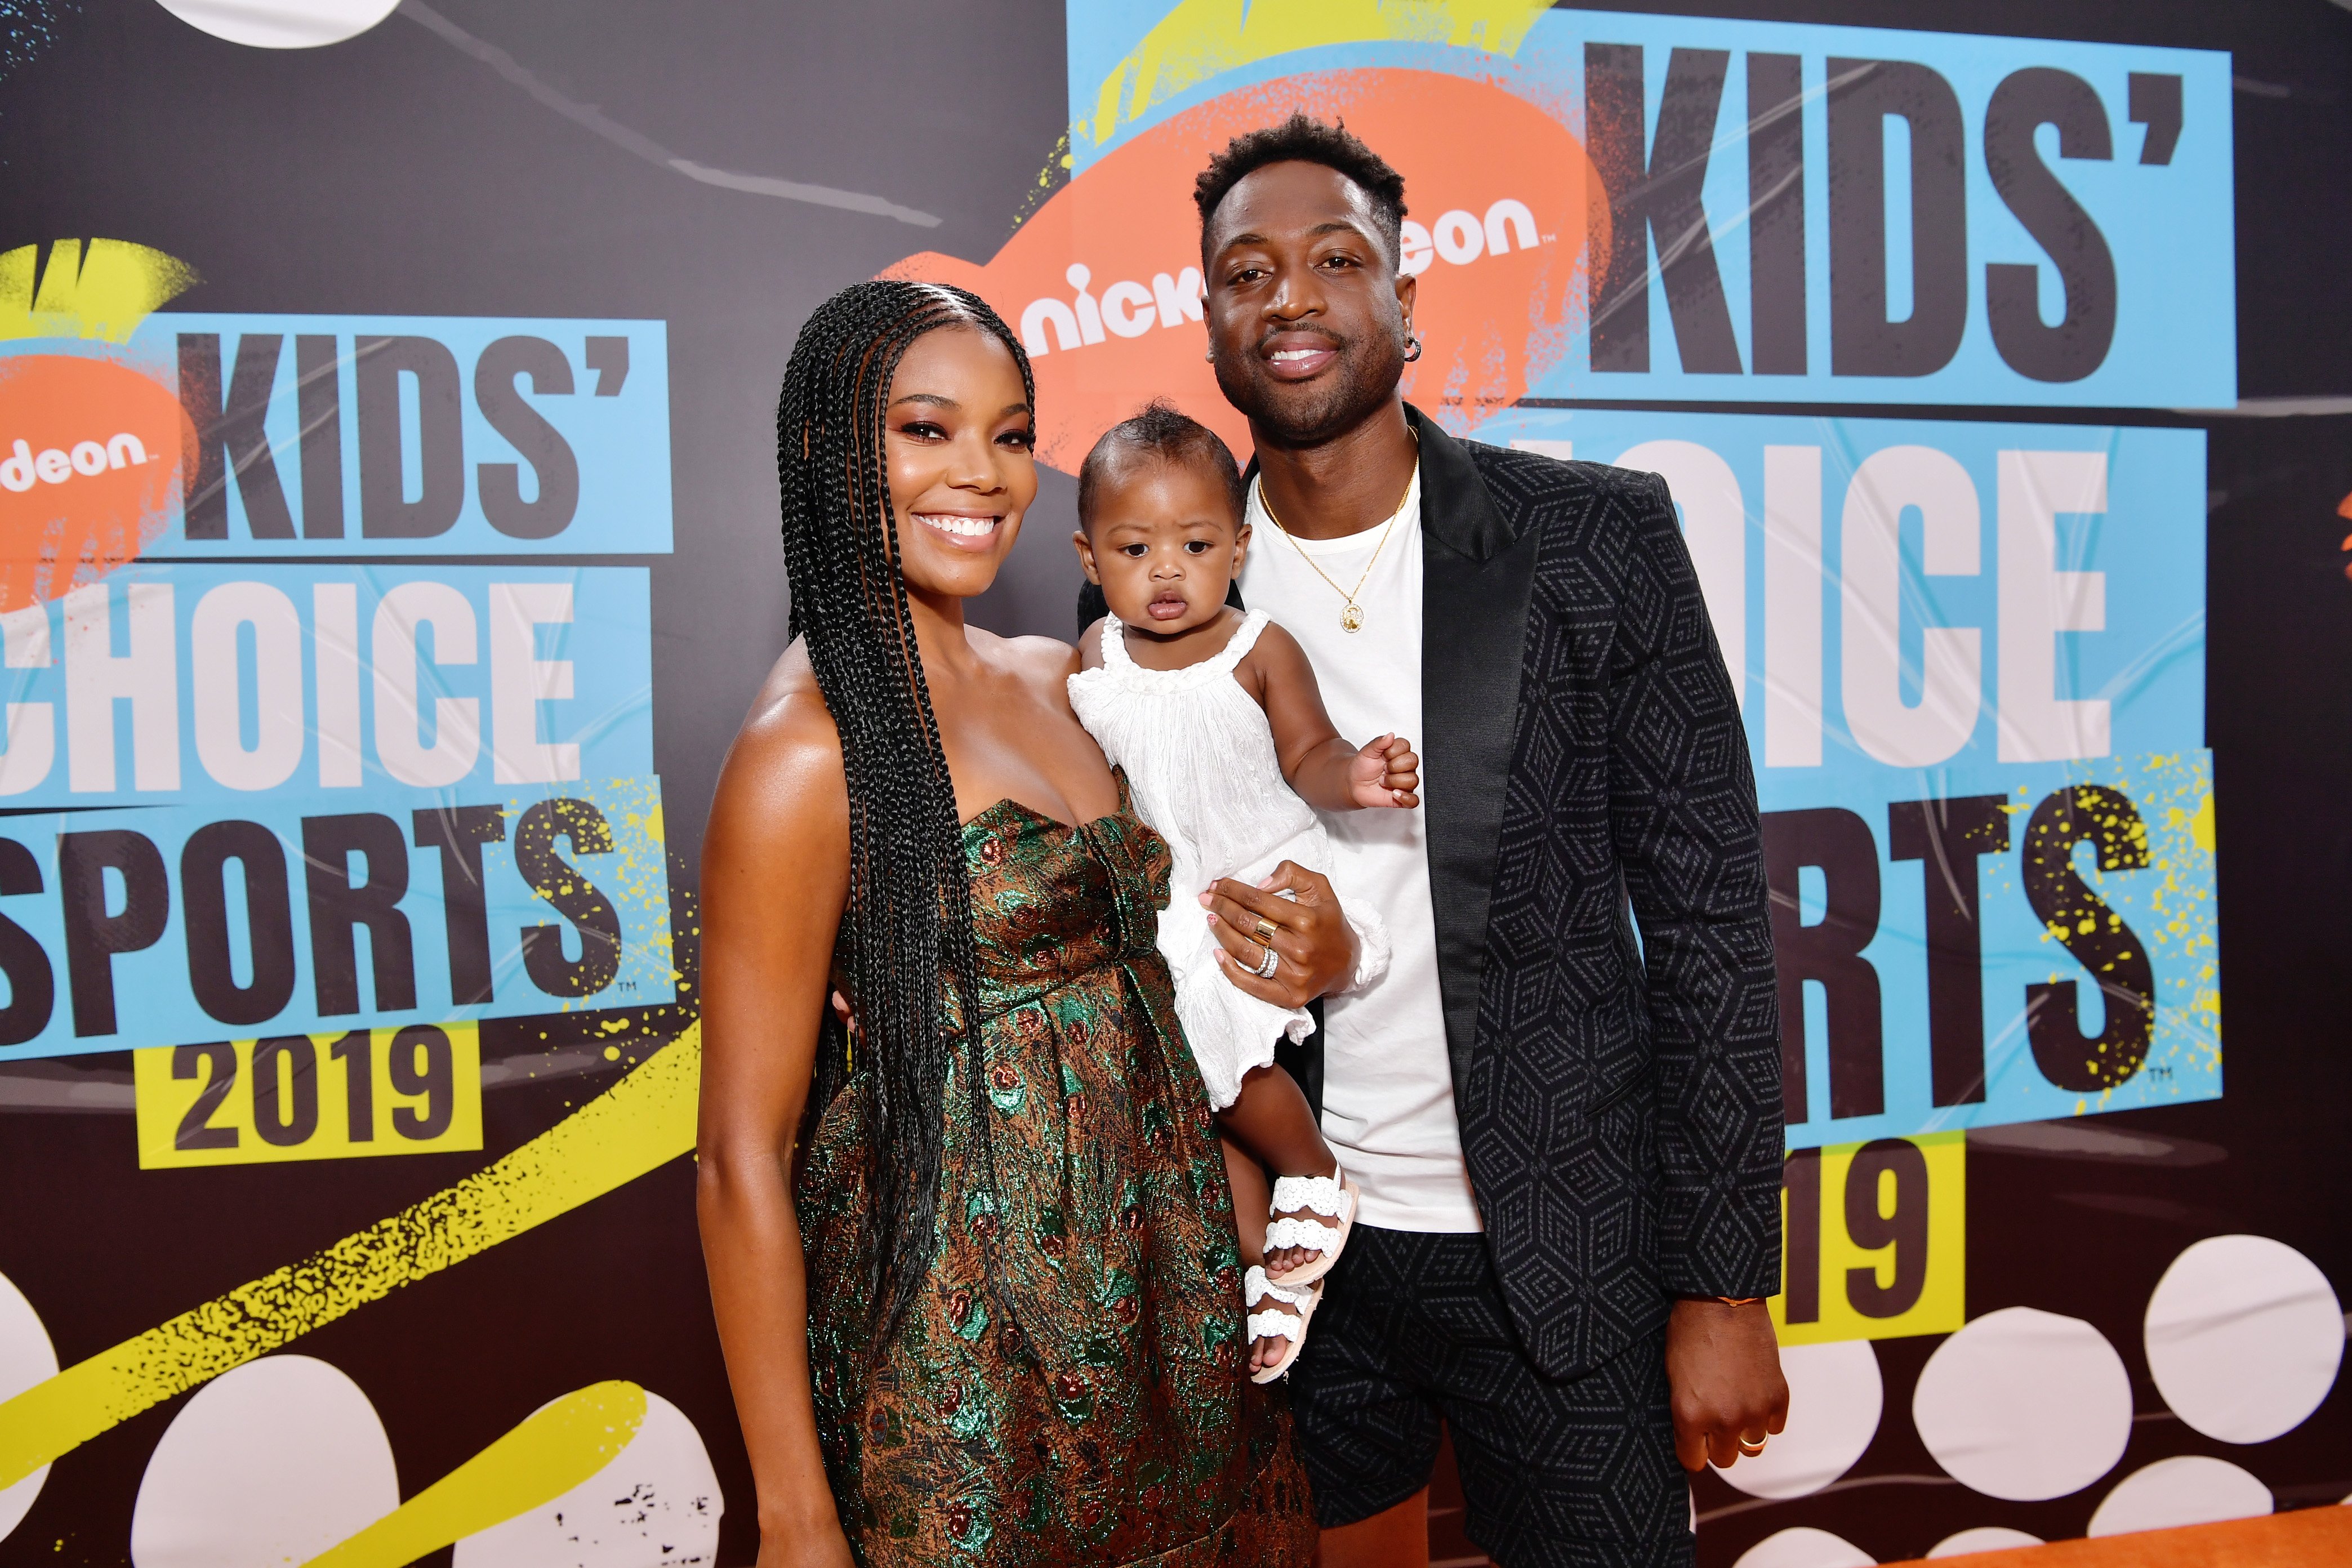 Gabrielle Union and Dwyane Wade with their daughter, Kaavia James attending Nickelodeon Kids' Choice Sports 2019 on July 11, 2019. | Source: Getty Images